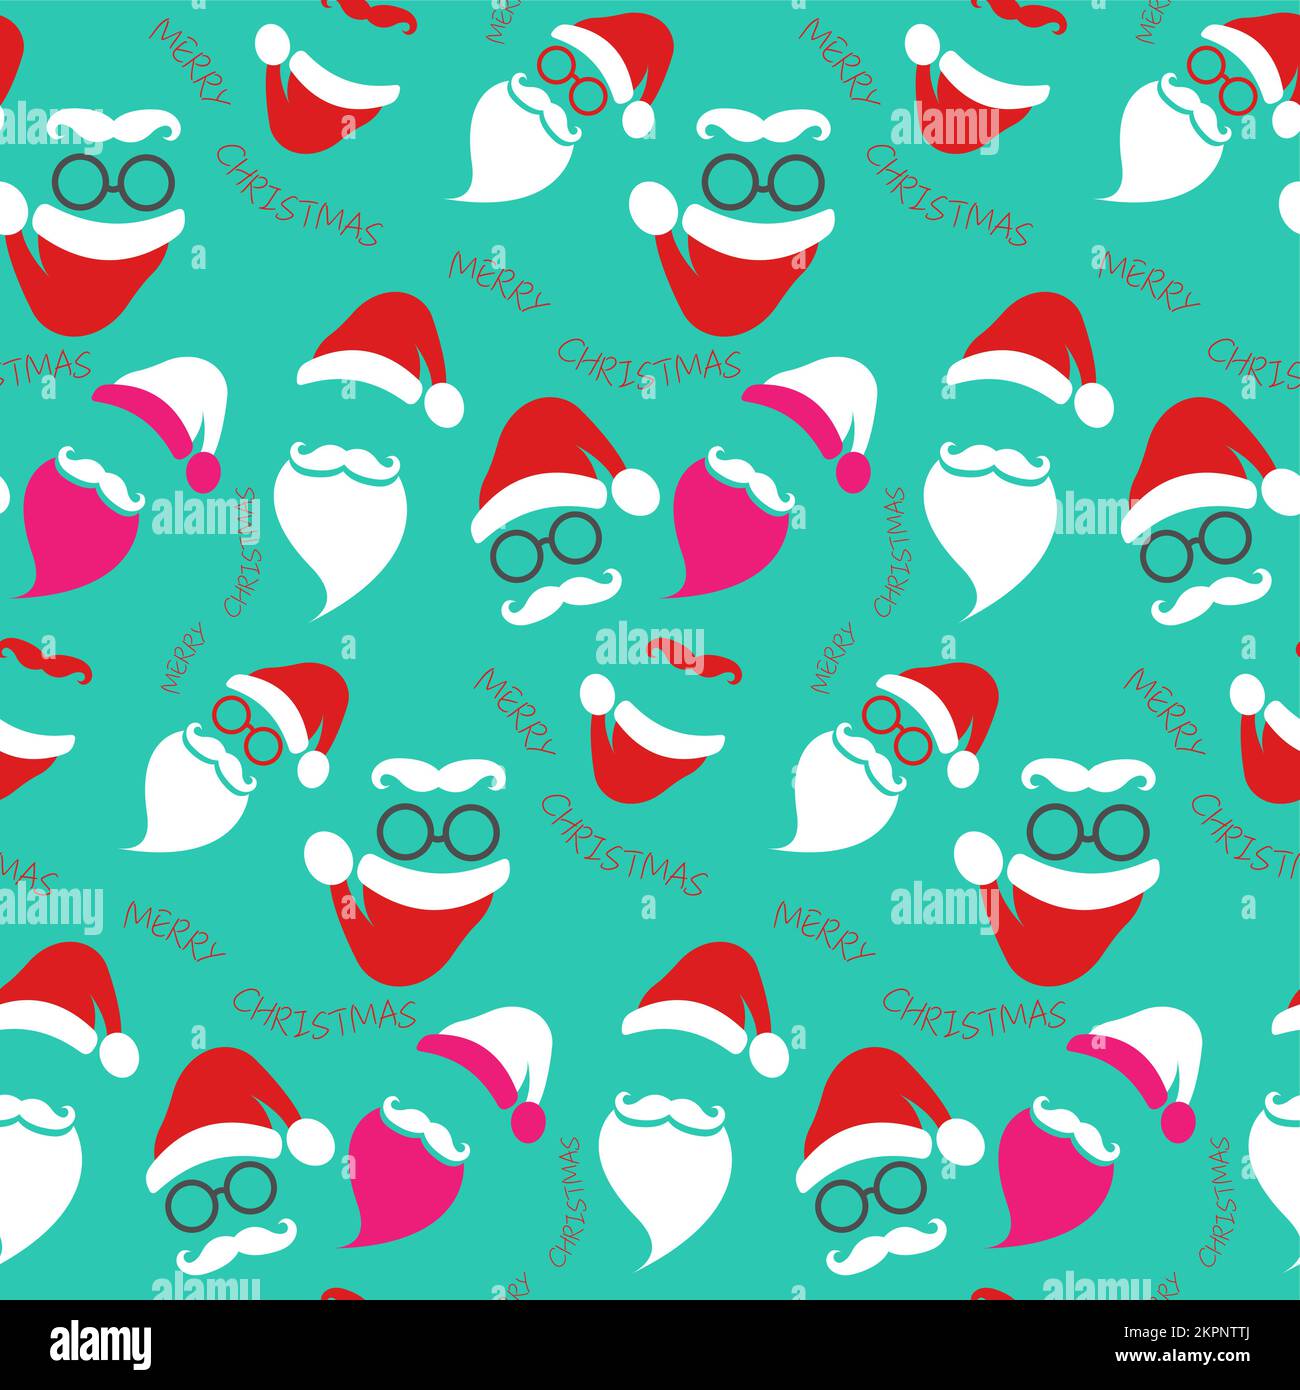 Seamless Santa Claus pattern fashion hipster style set icons. Santa hats, moustache and beards, glasses. Merry Christmas elements for your festive Stock Vector